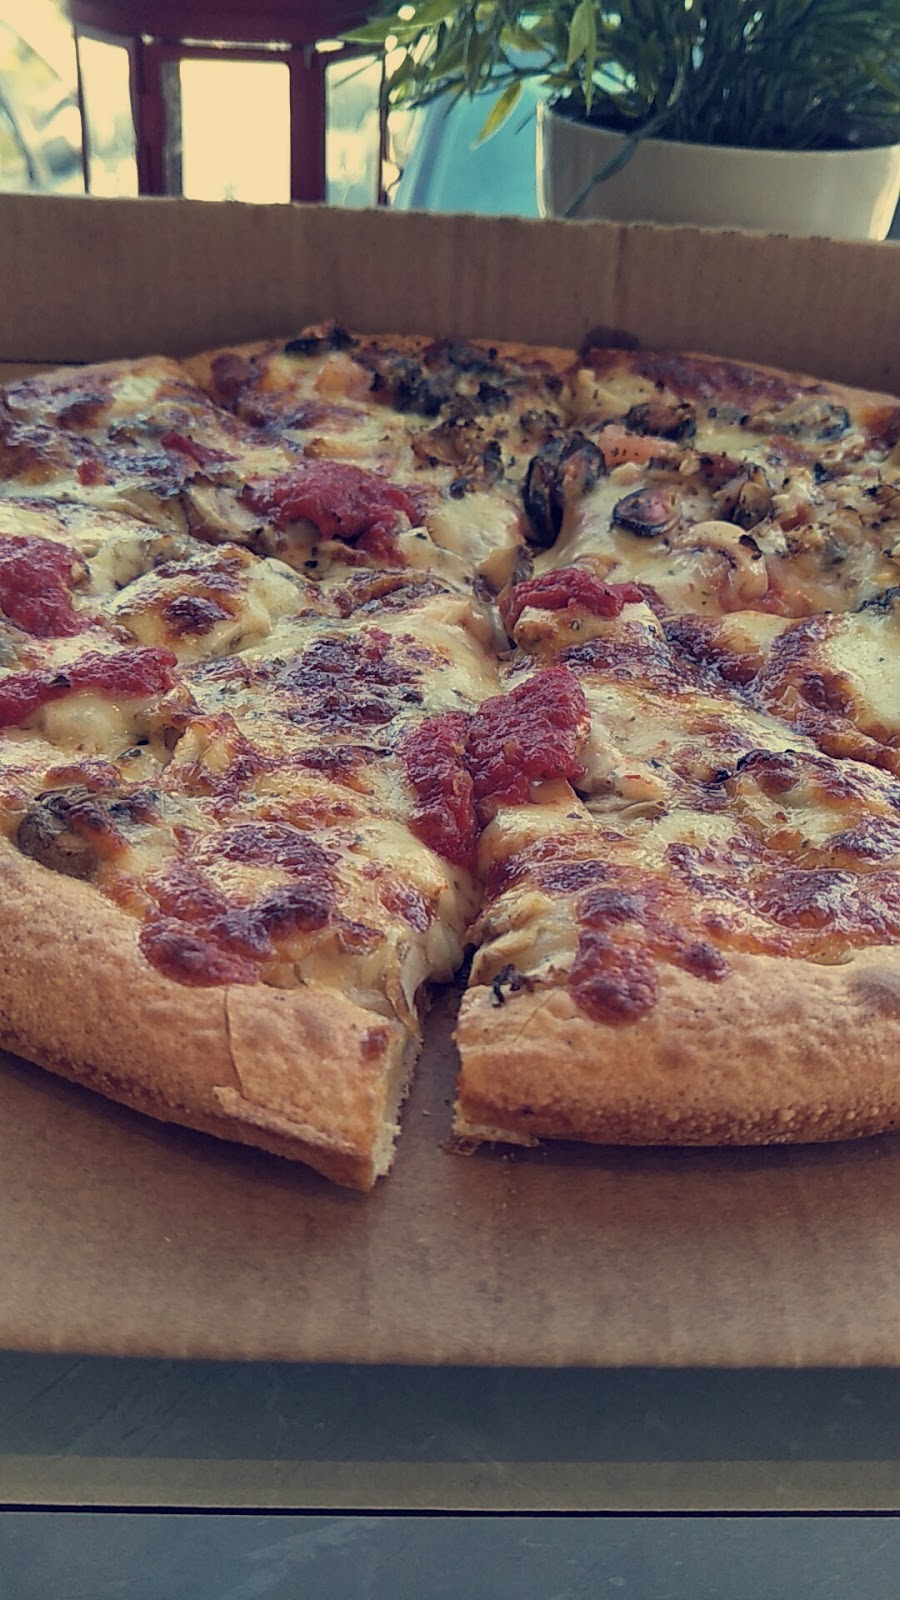 Jessies Pizza | meal delivery | 119/135 Thompson Ave, Cowes VIC 3922, Australia | 0359523935 OR +61 3 5952 3935